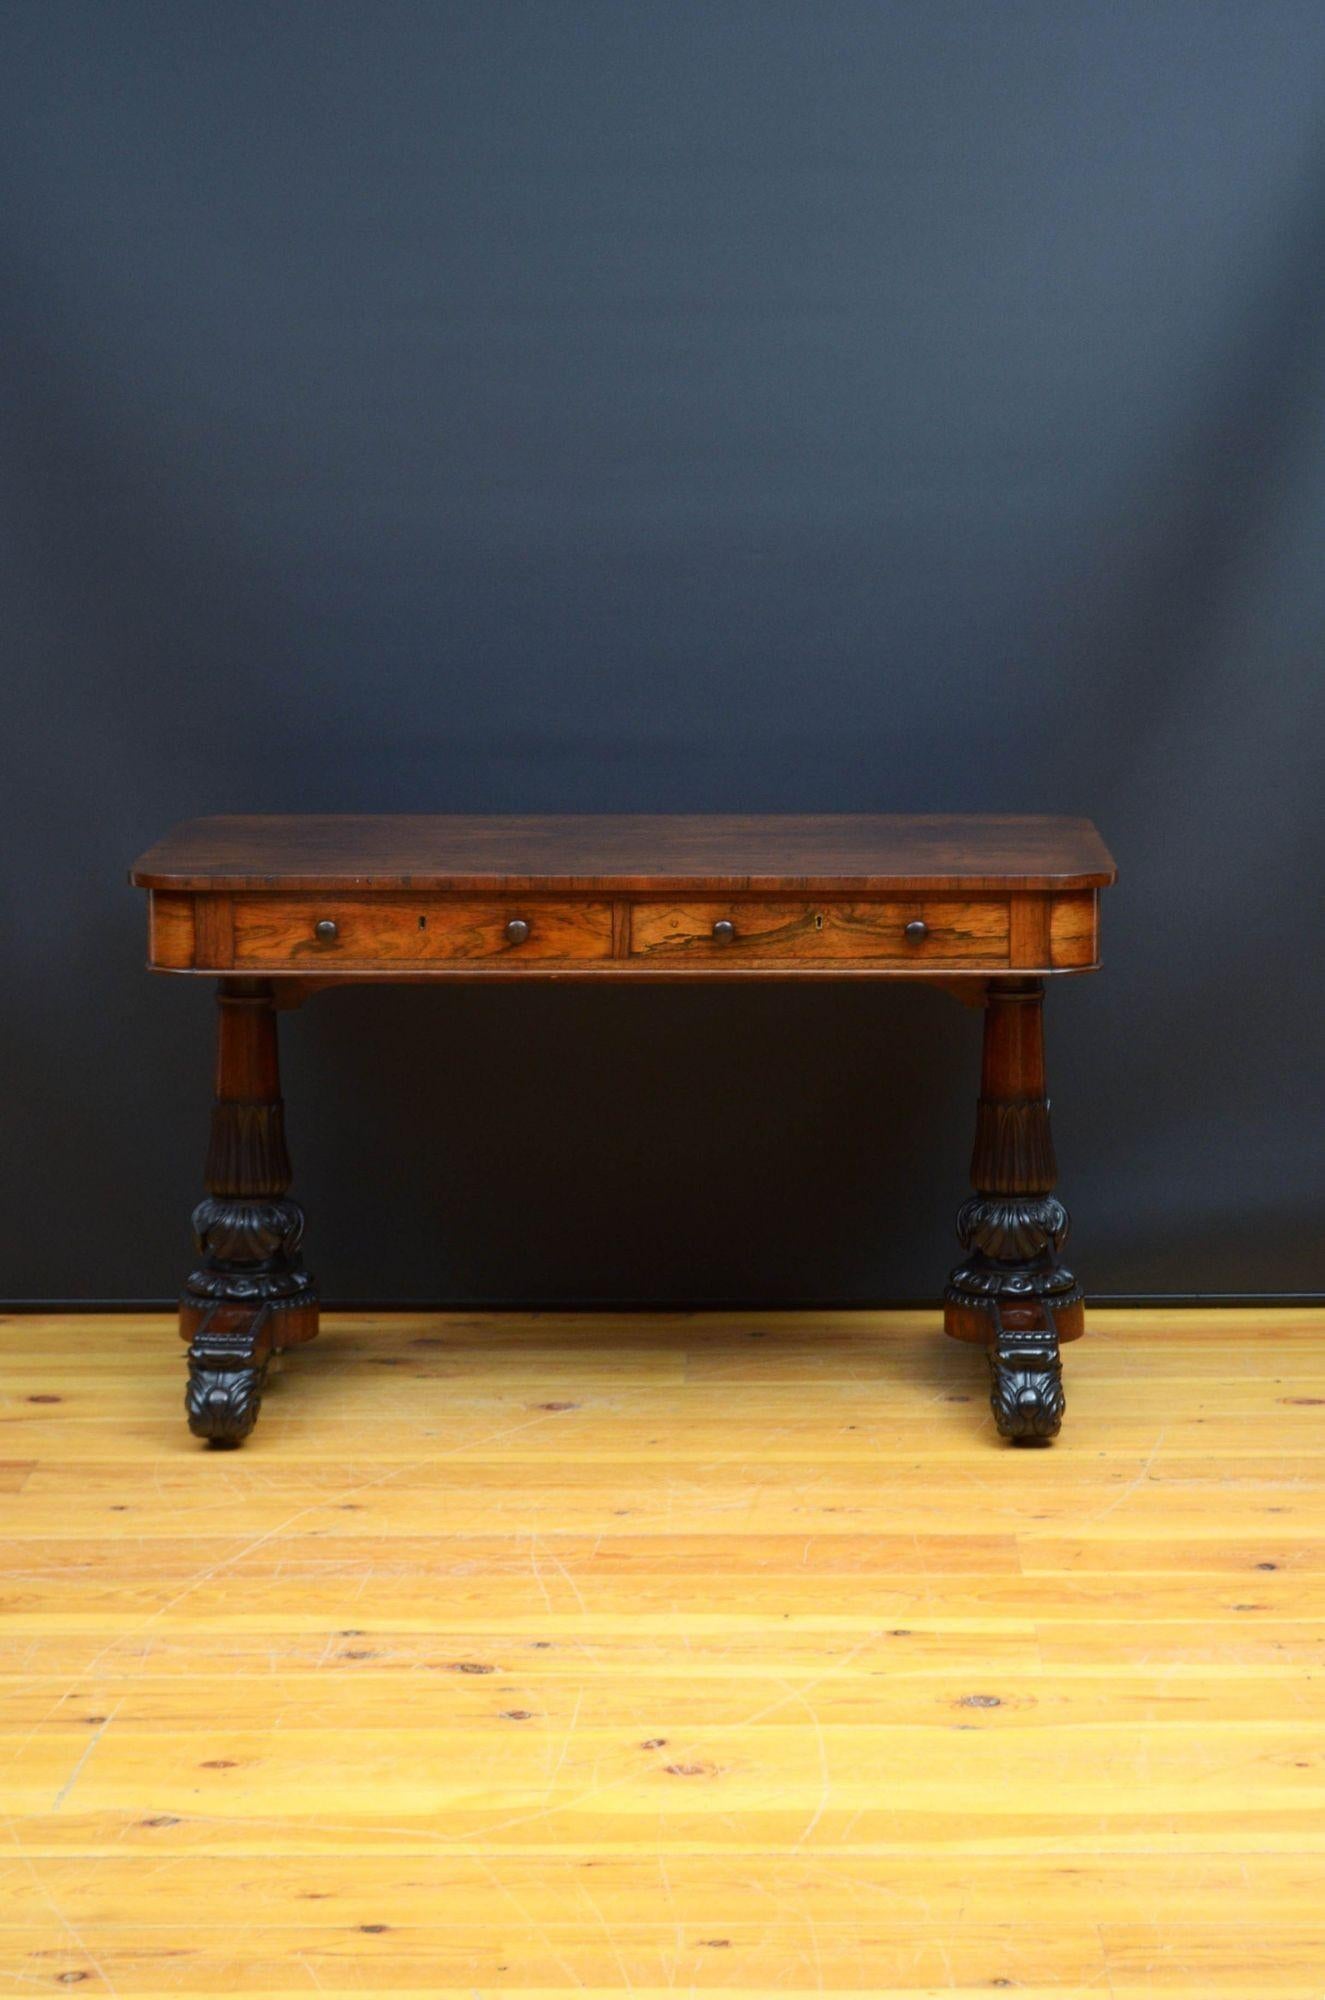 Sn5528 Outstanding George IV rosewood library table in the manner of Gillows, having stunning well figured rosewood top above two mahogany lined frieze drawers fitted with original turned knobs, all standing on two tulip carved columns with acanthus